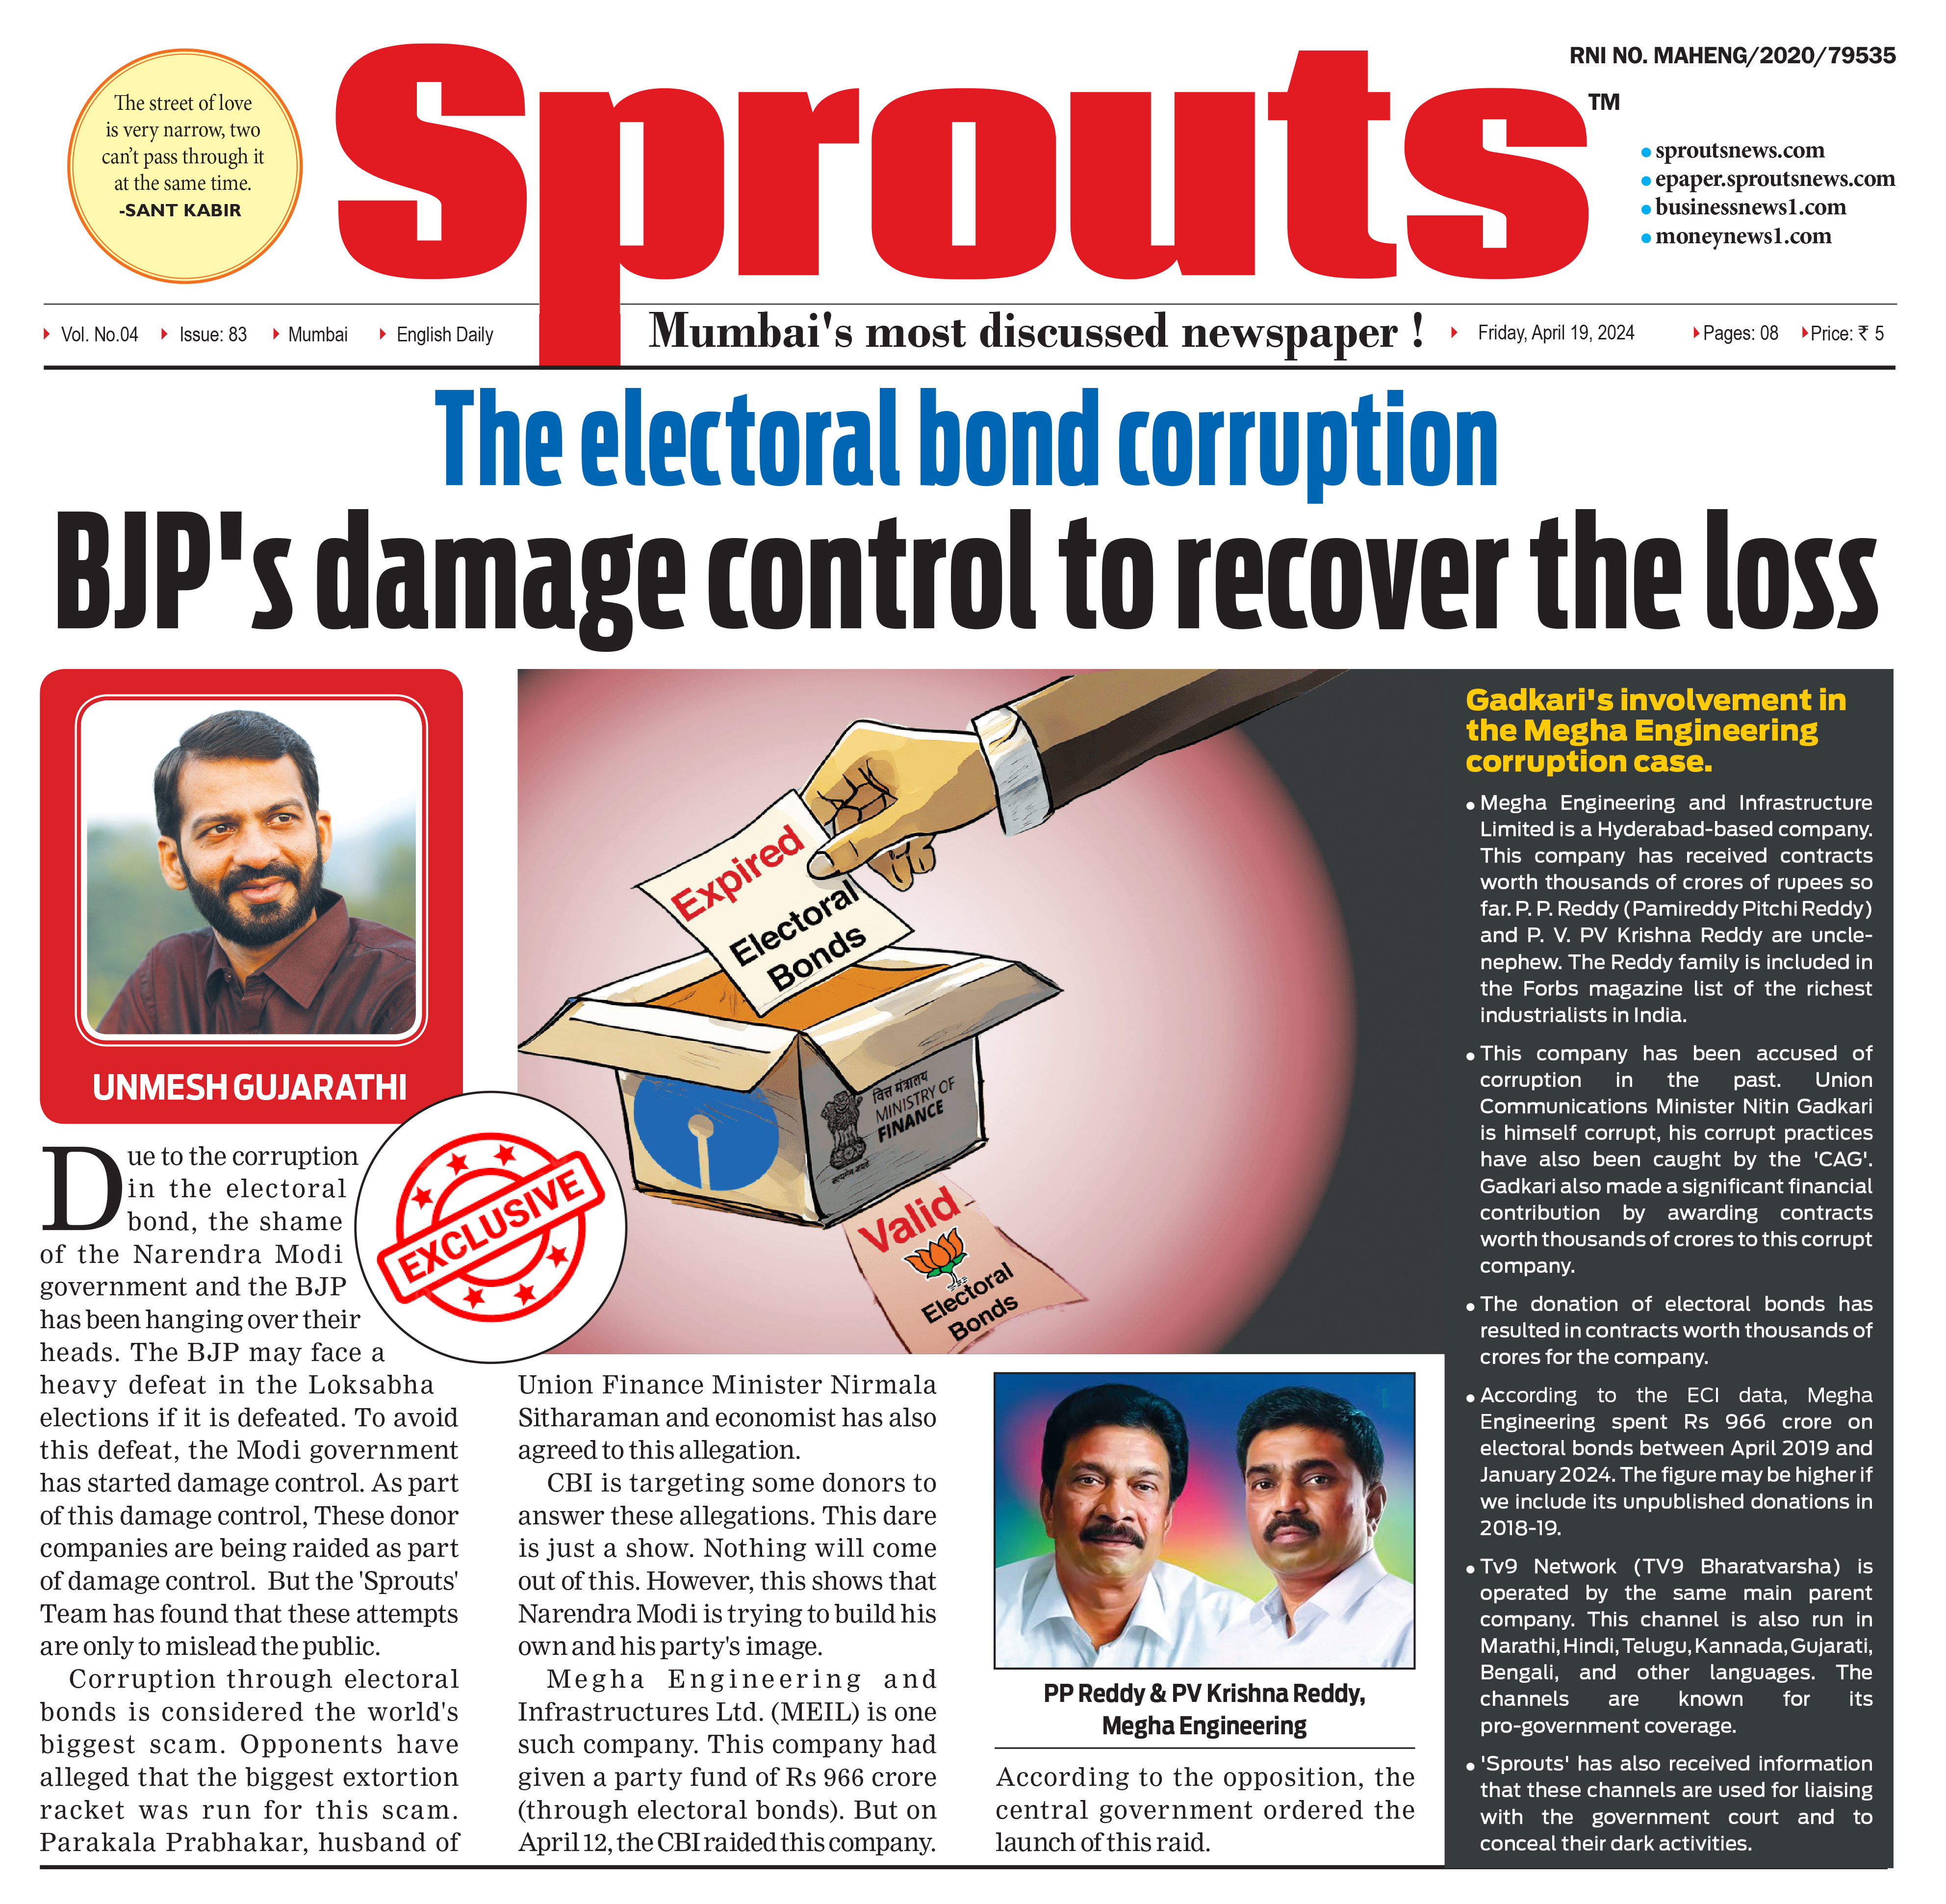 BJP’s damage control to recover the loss from the electoral bond corruption